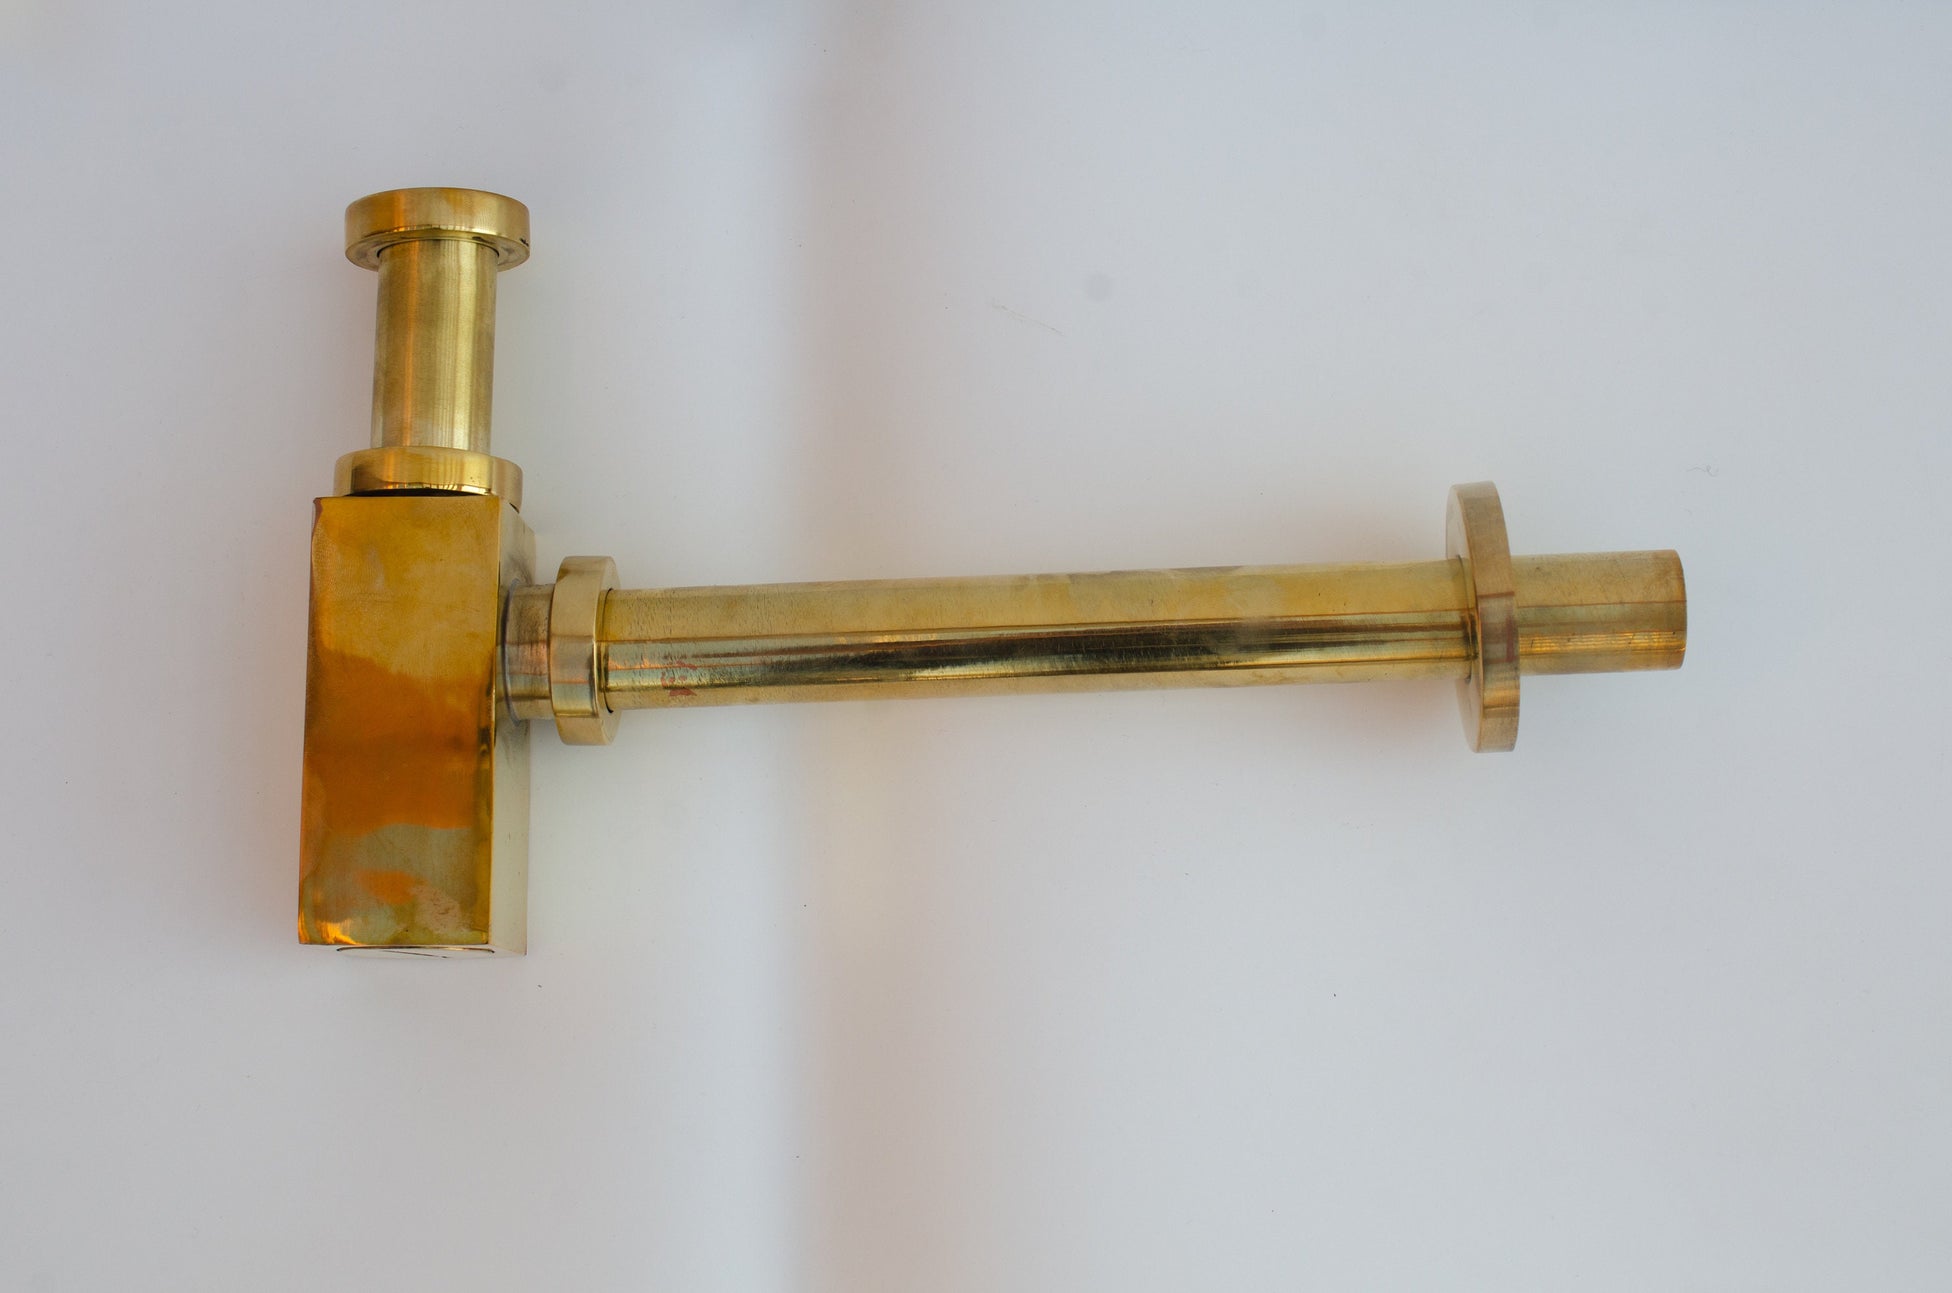 Solid Brass water trap sink stopper with brass push up button Zayian